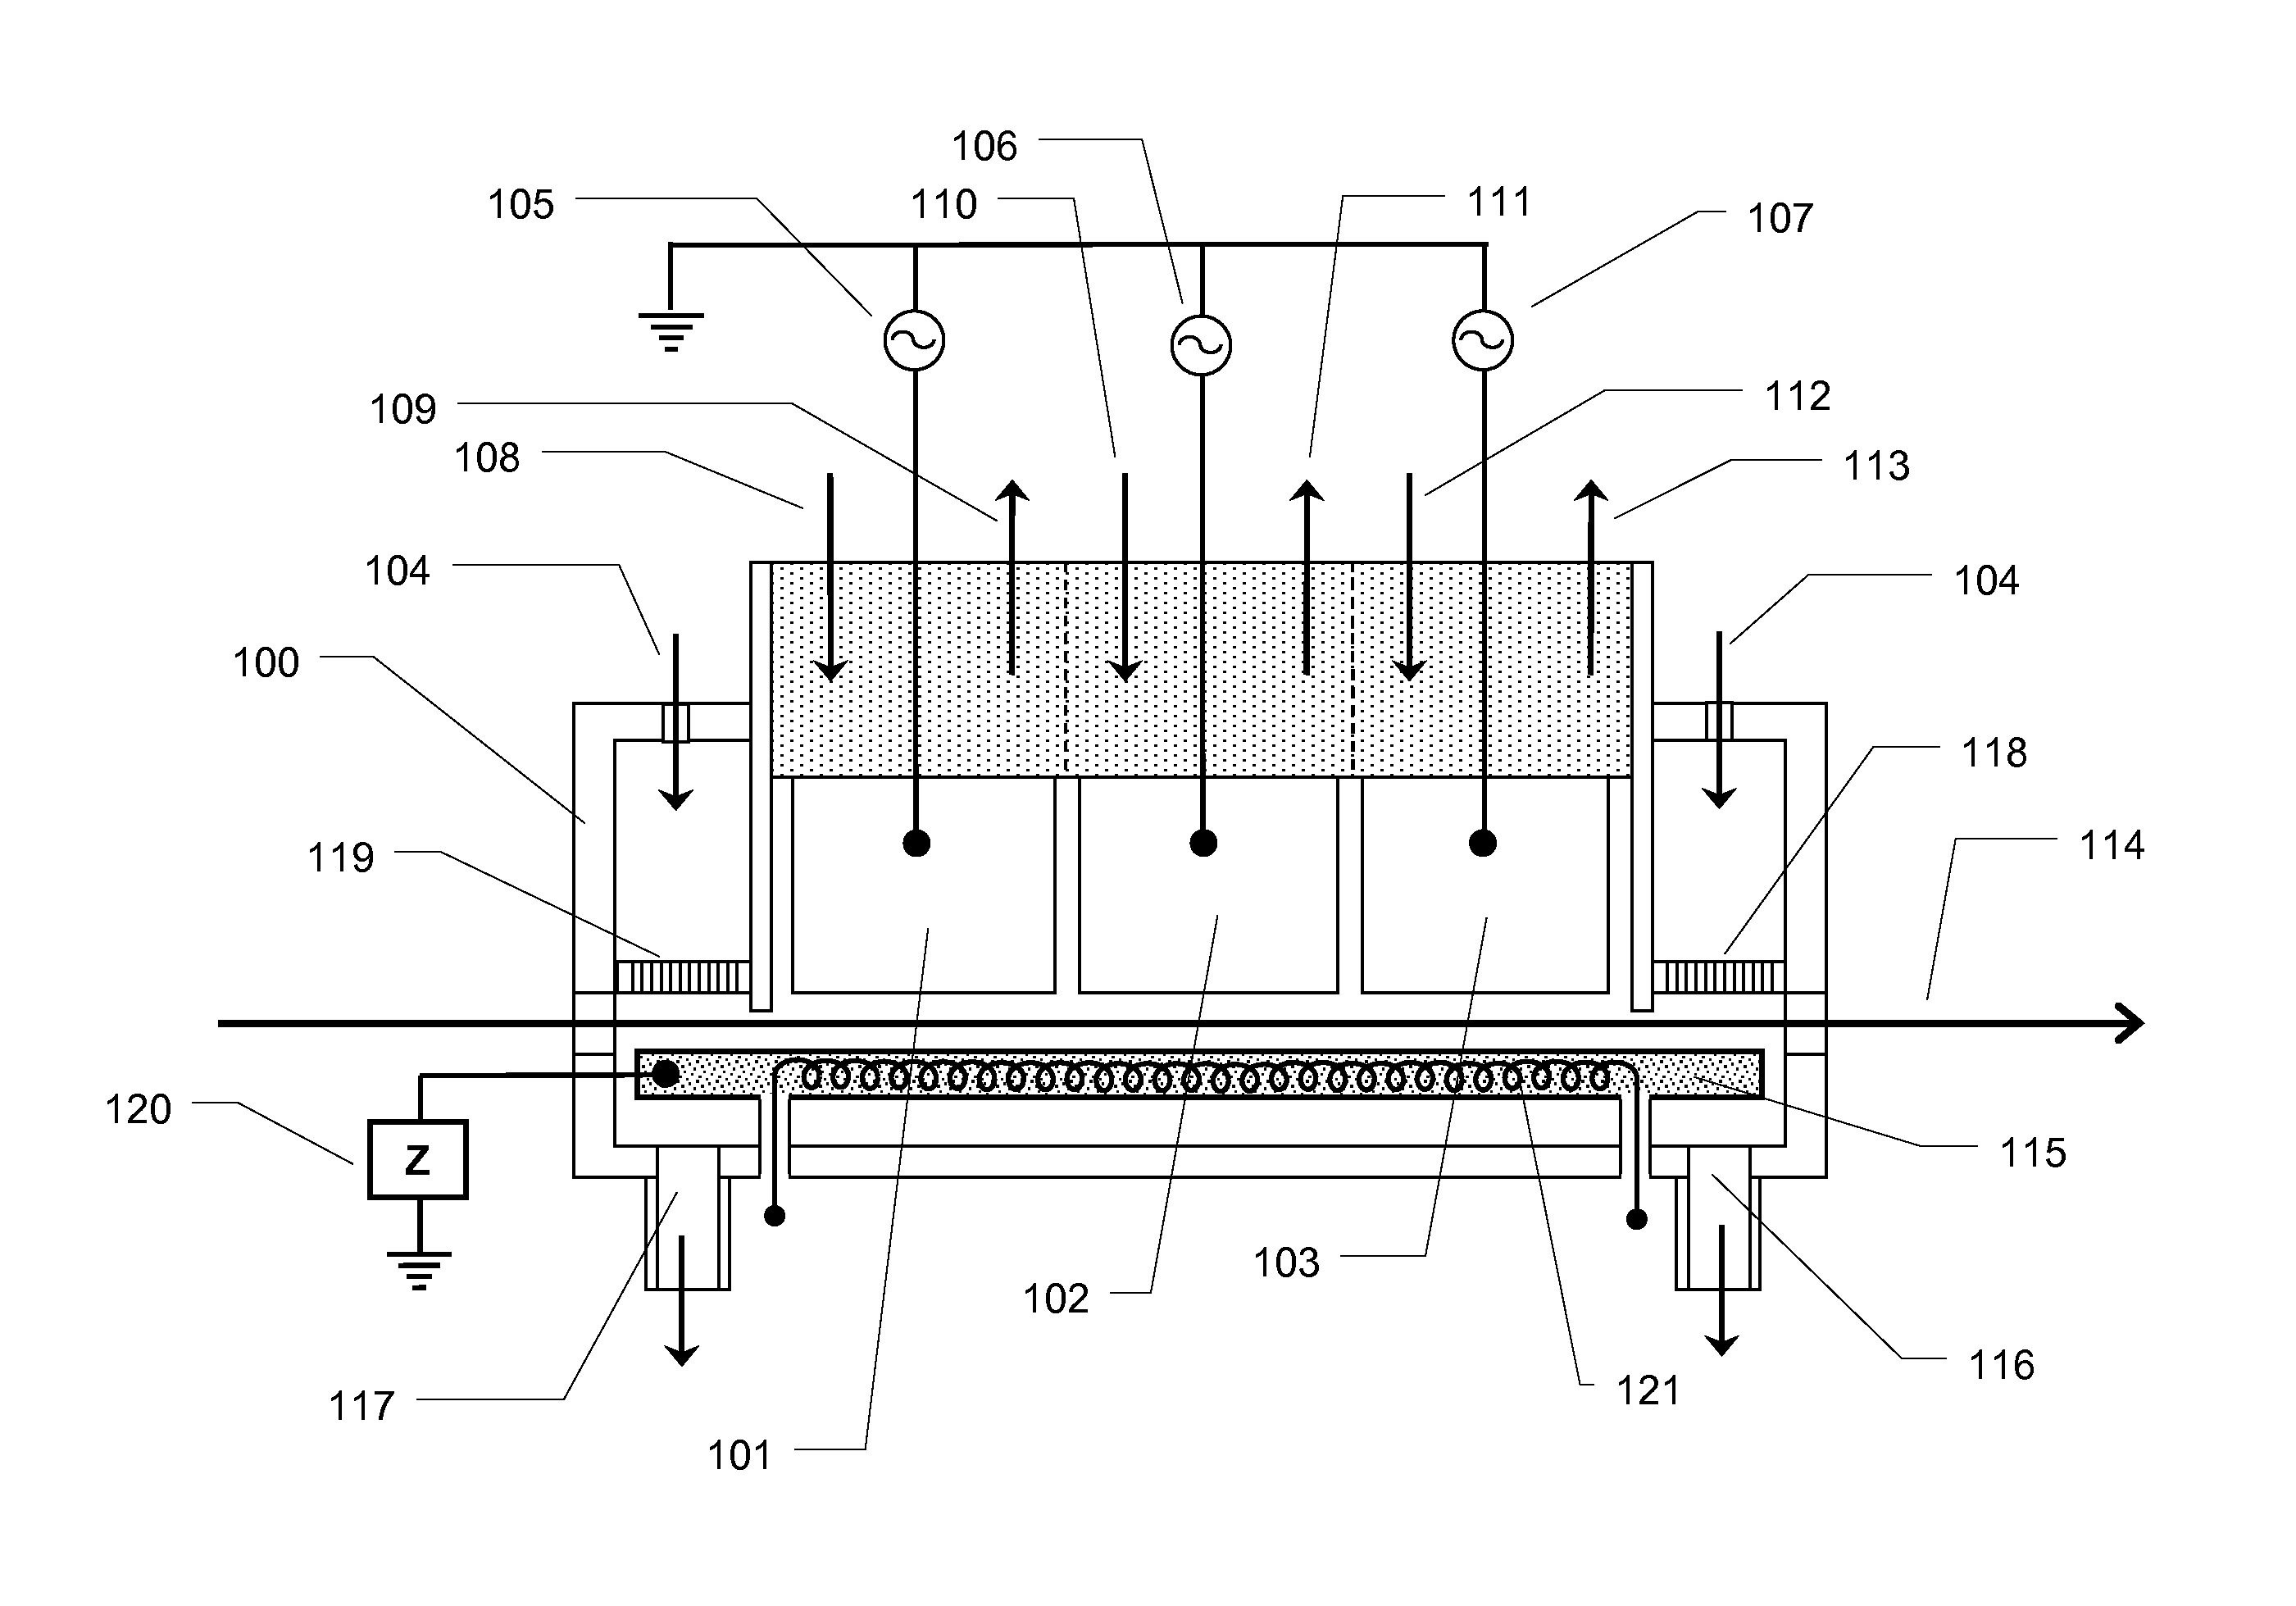 Apparatus and method for forming thin protective and optical layers on substrates